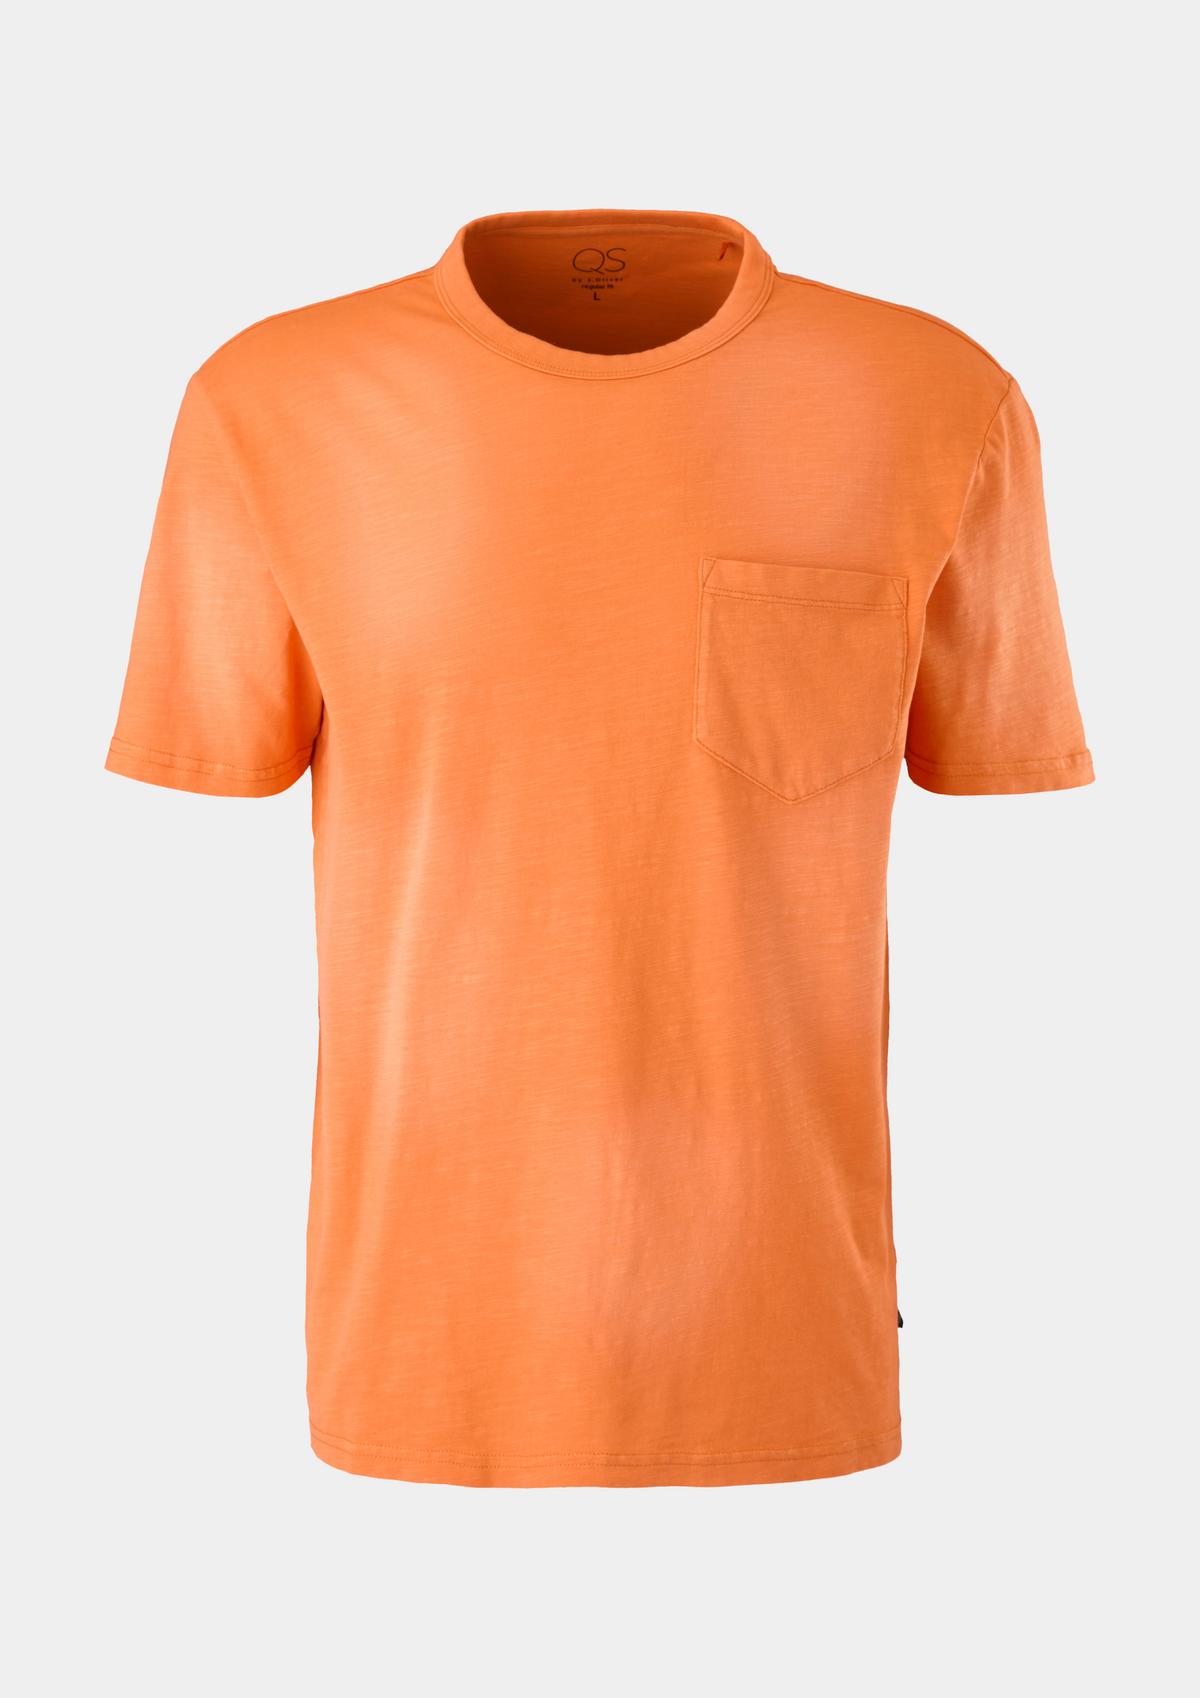 with orange a breast pocket - T-shirt